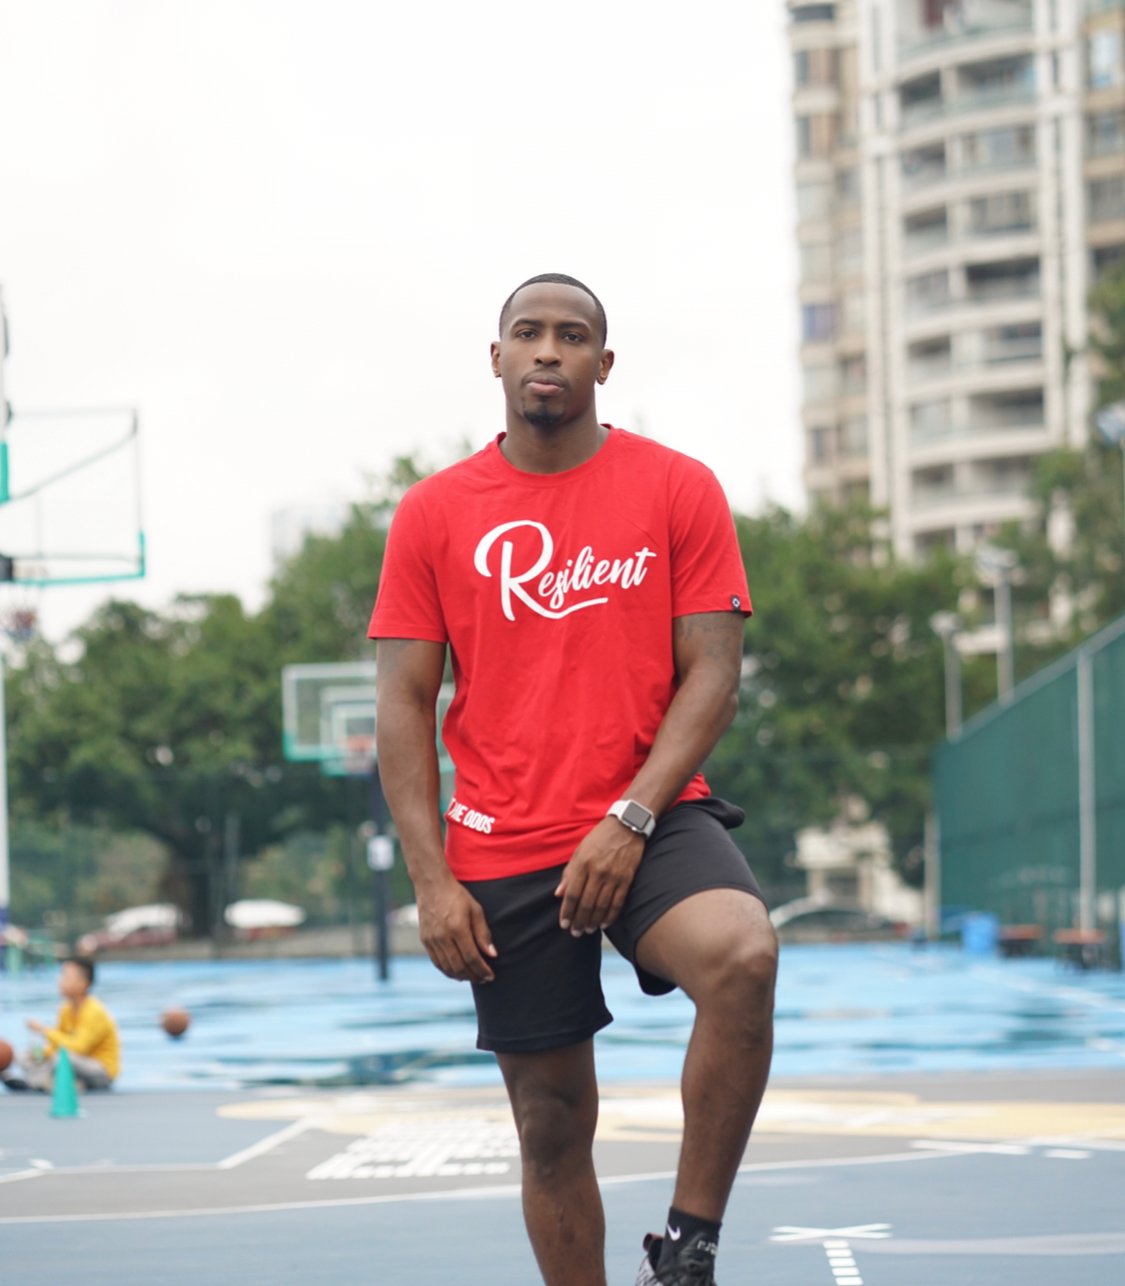 Image of “Resilient” Tee 